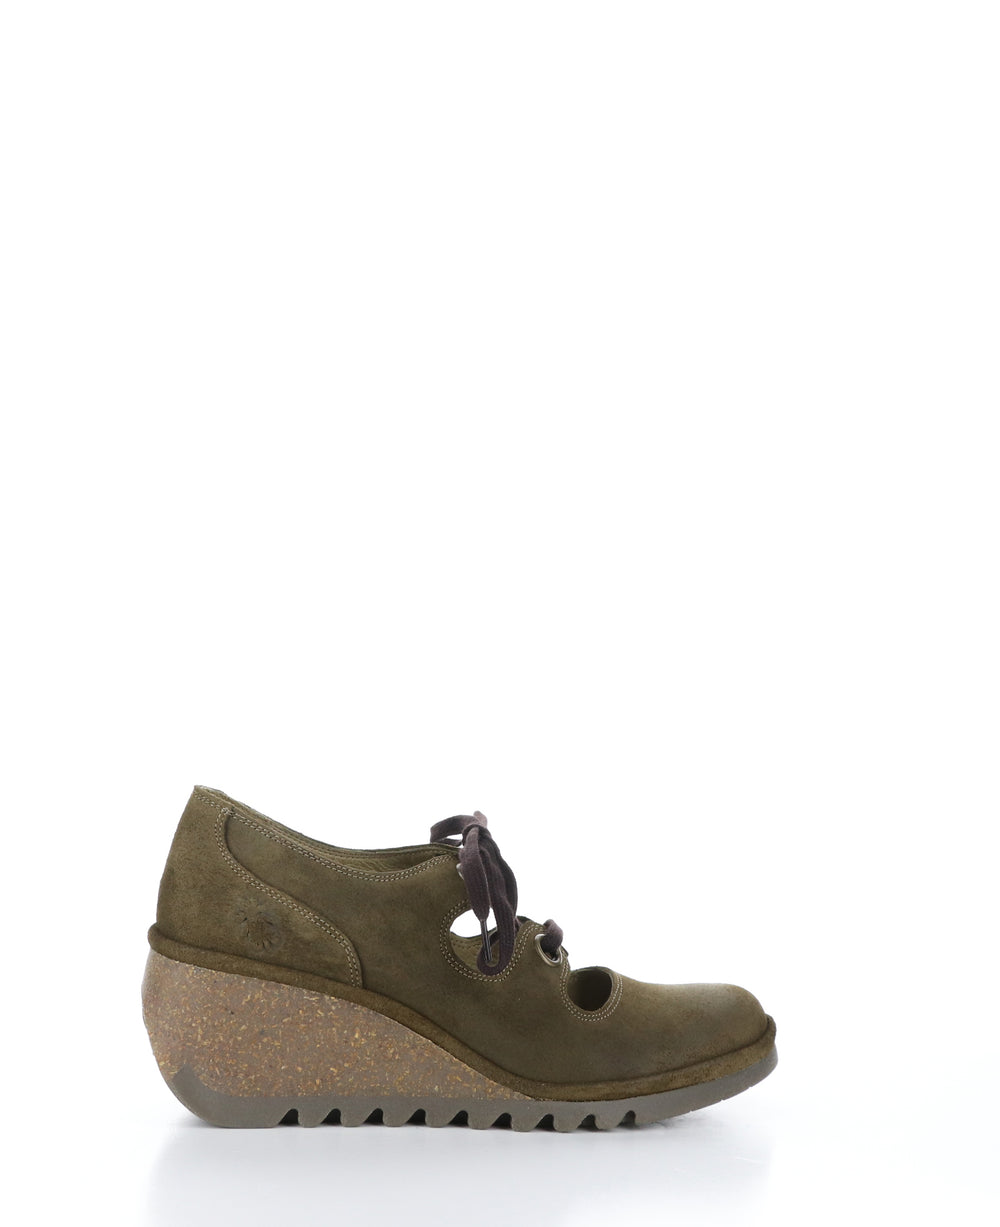 NELY337FLY Sludge Round Toe Shoes|NELY337FLY Chaussures à Bout Rond in Vert